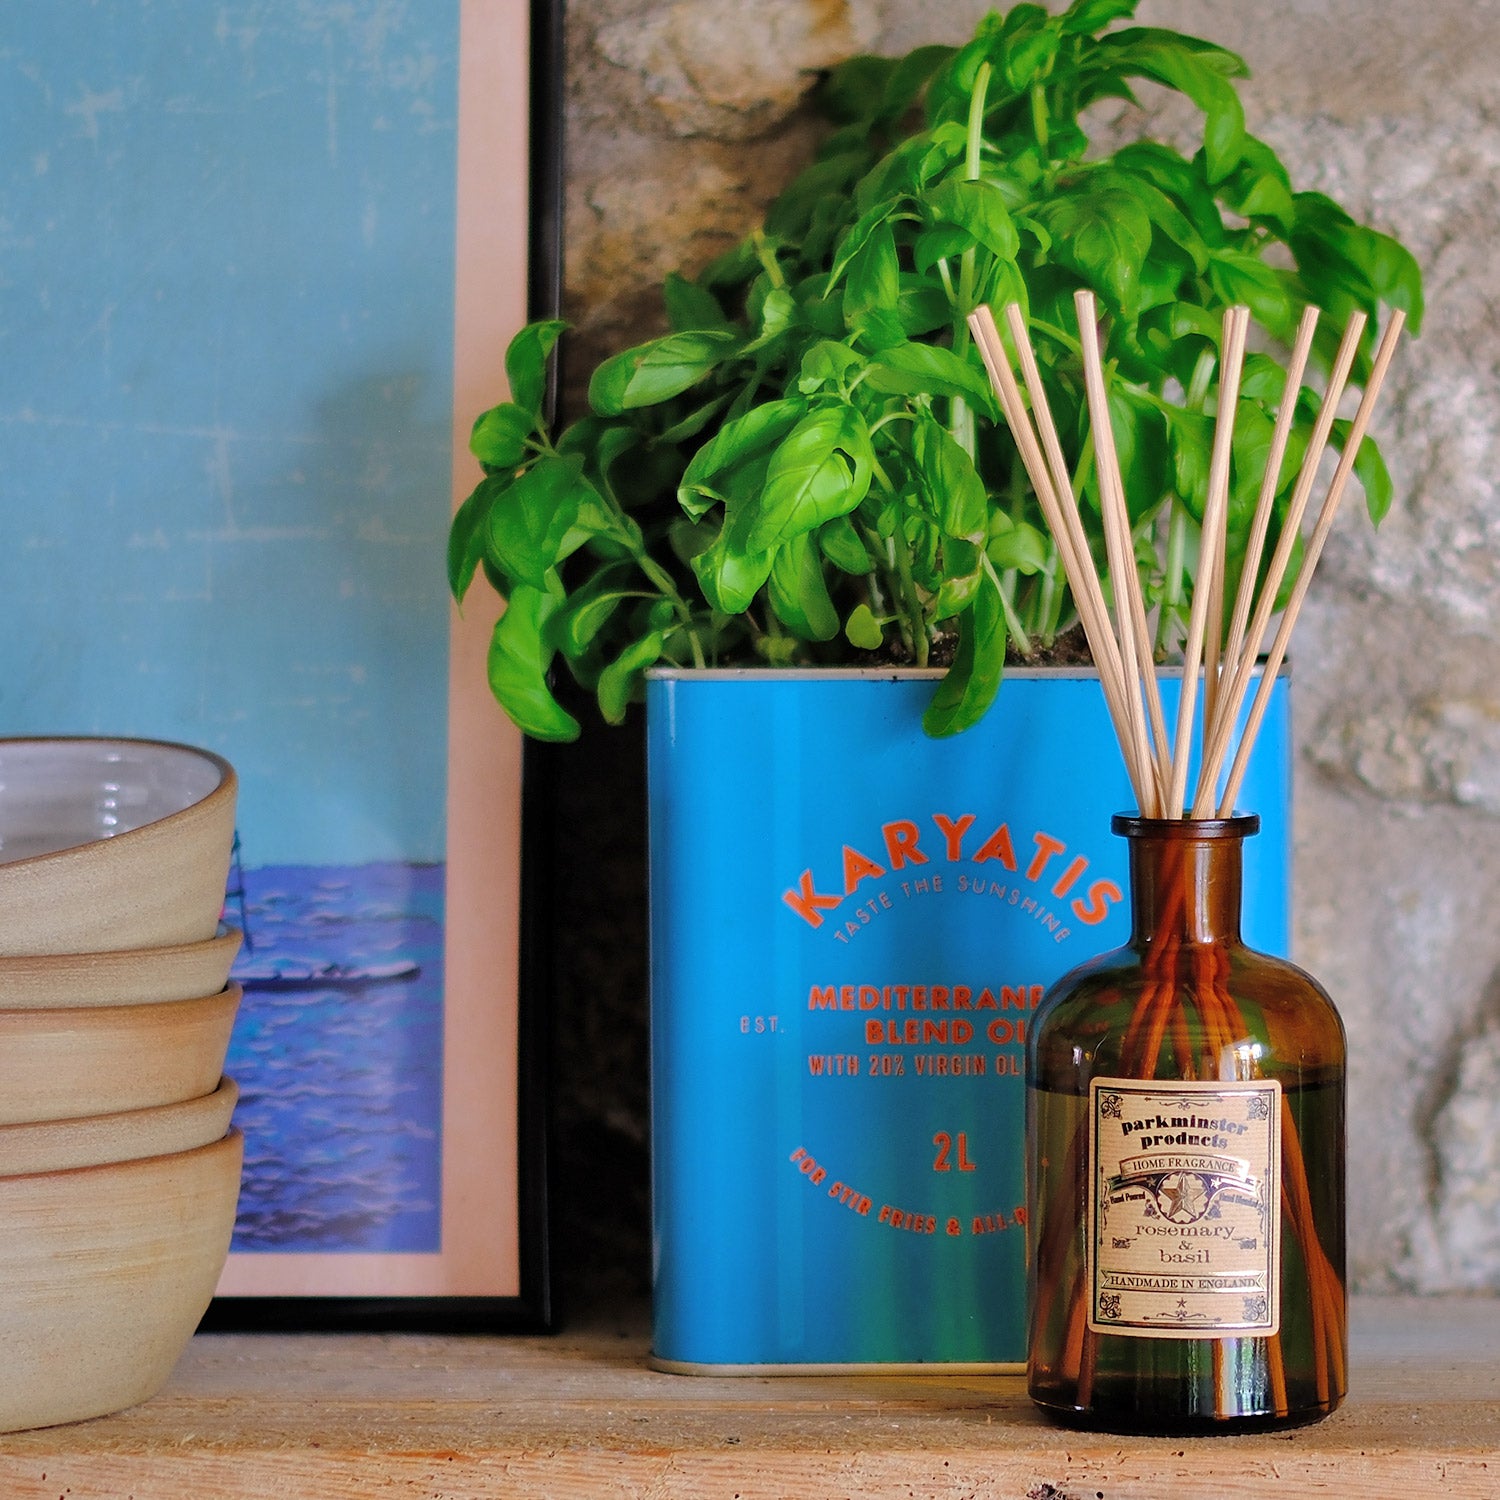 Infuse your home with the invigorating scent of Rosemary & Basil using Parkminster's 200ml amber glass Apothecary Reed Diffuser. Handcrafted in our Cornish workshop, this stylish diffuser is made with 100% essential oils, offering a natural and refreshing fragrance solution